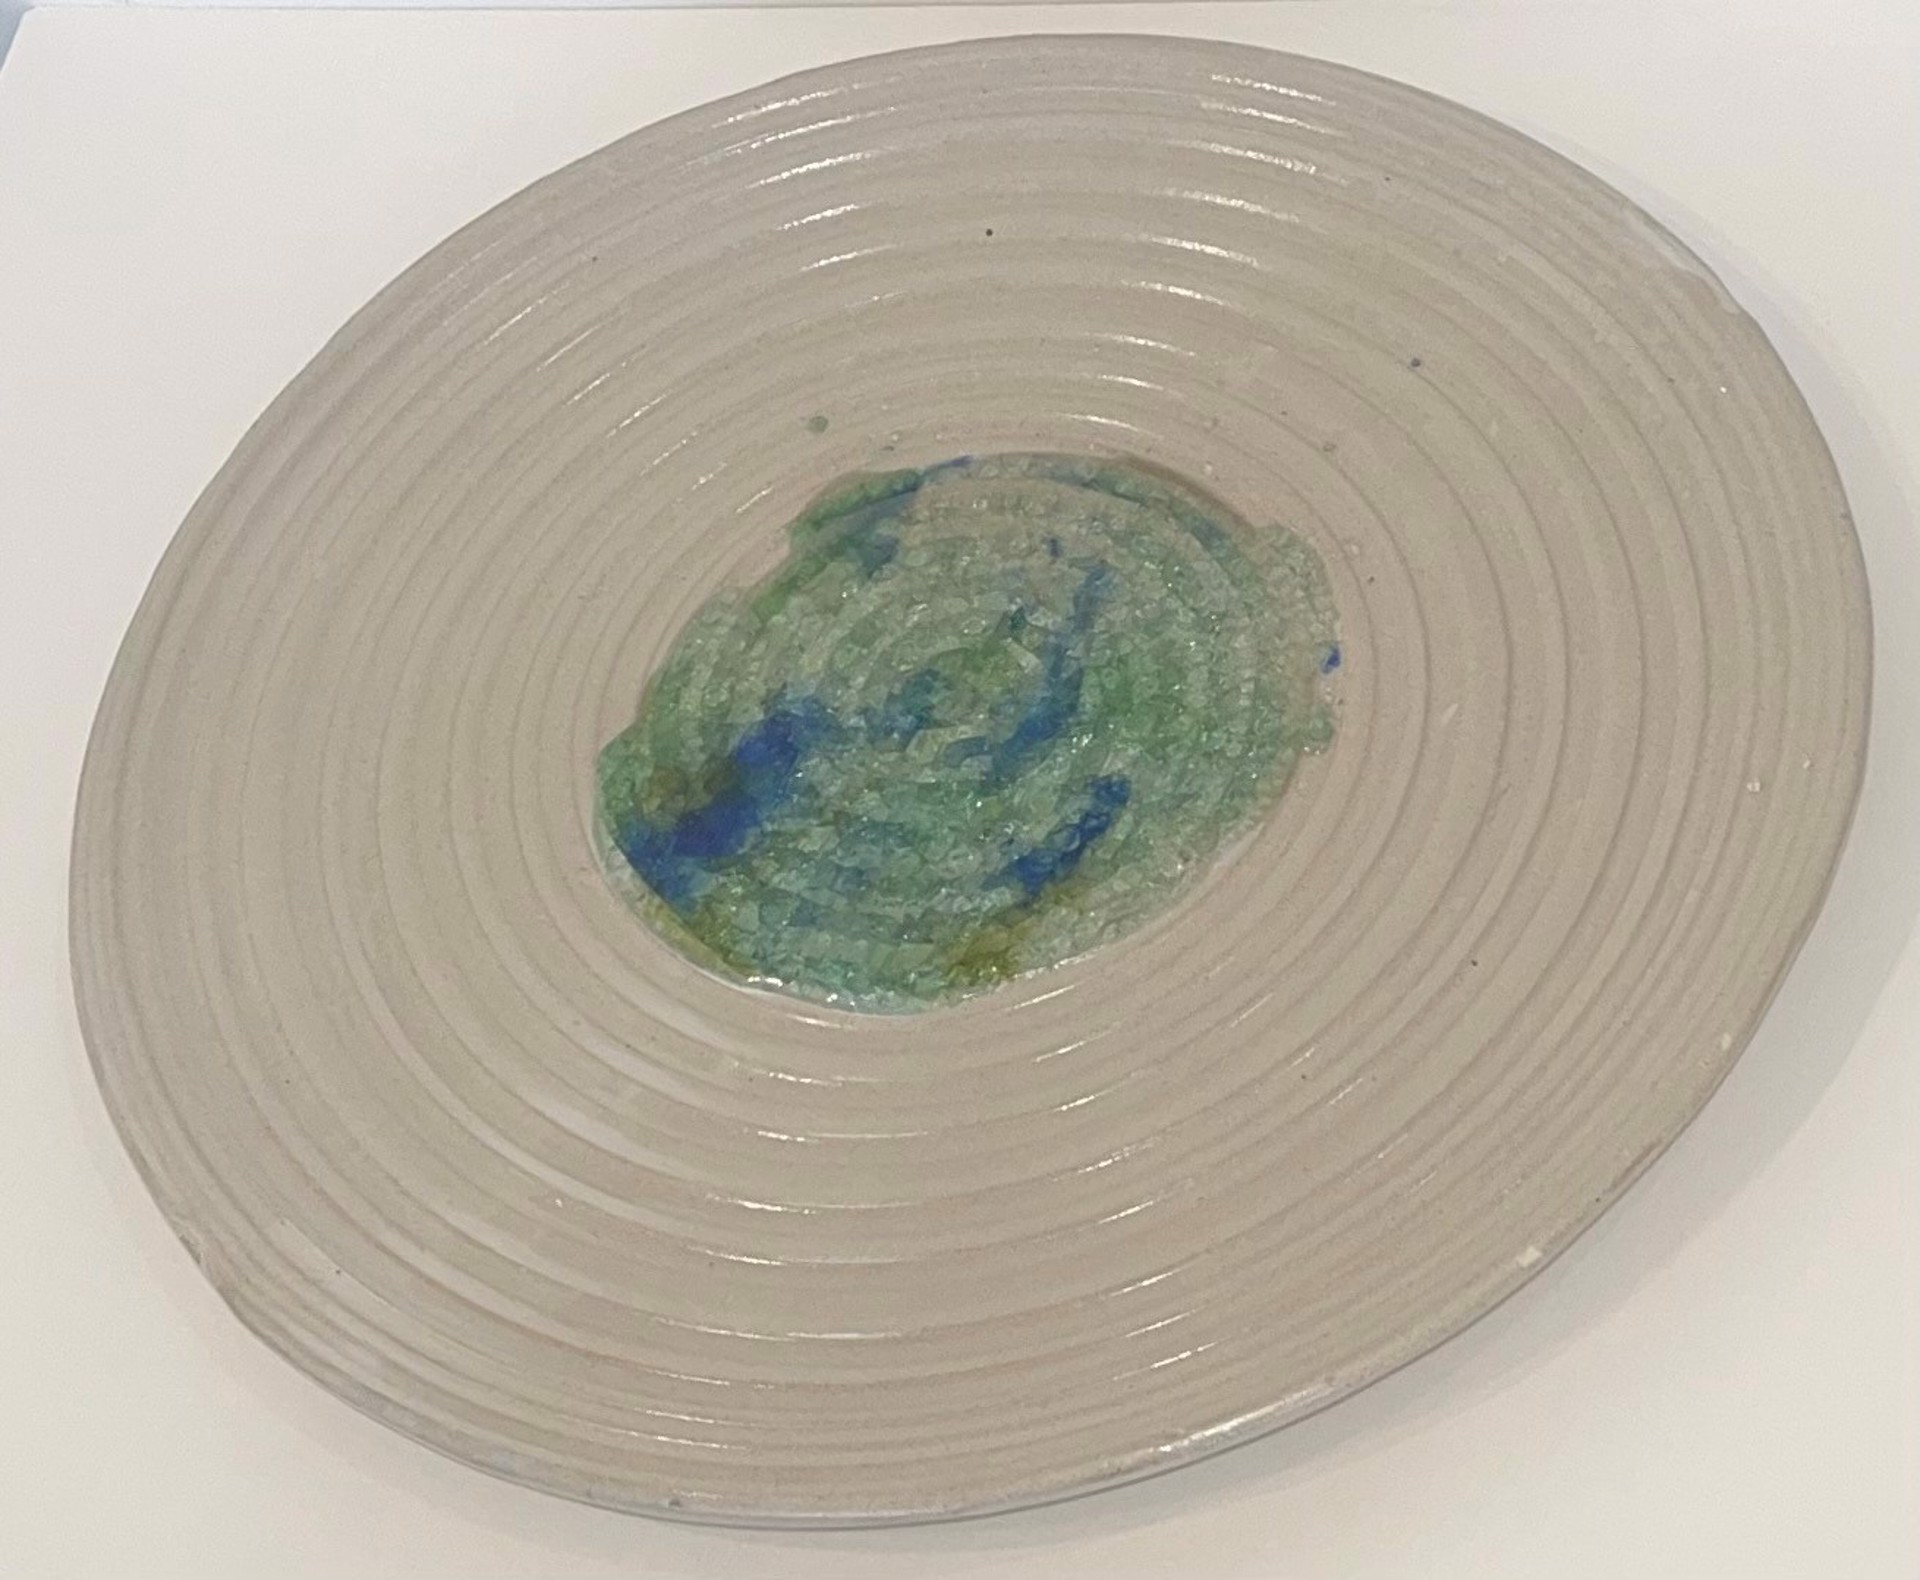 Charger, Ocean with Blue, Turquoise, Green Glass by Satterfield Pottery